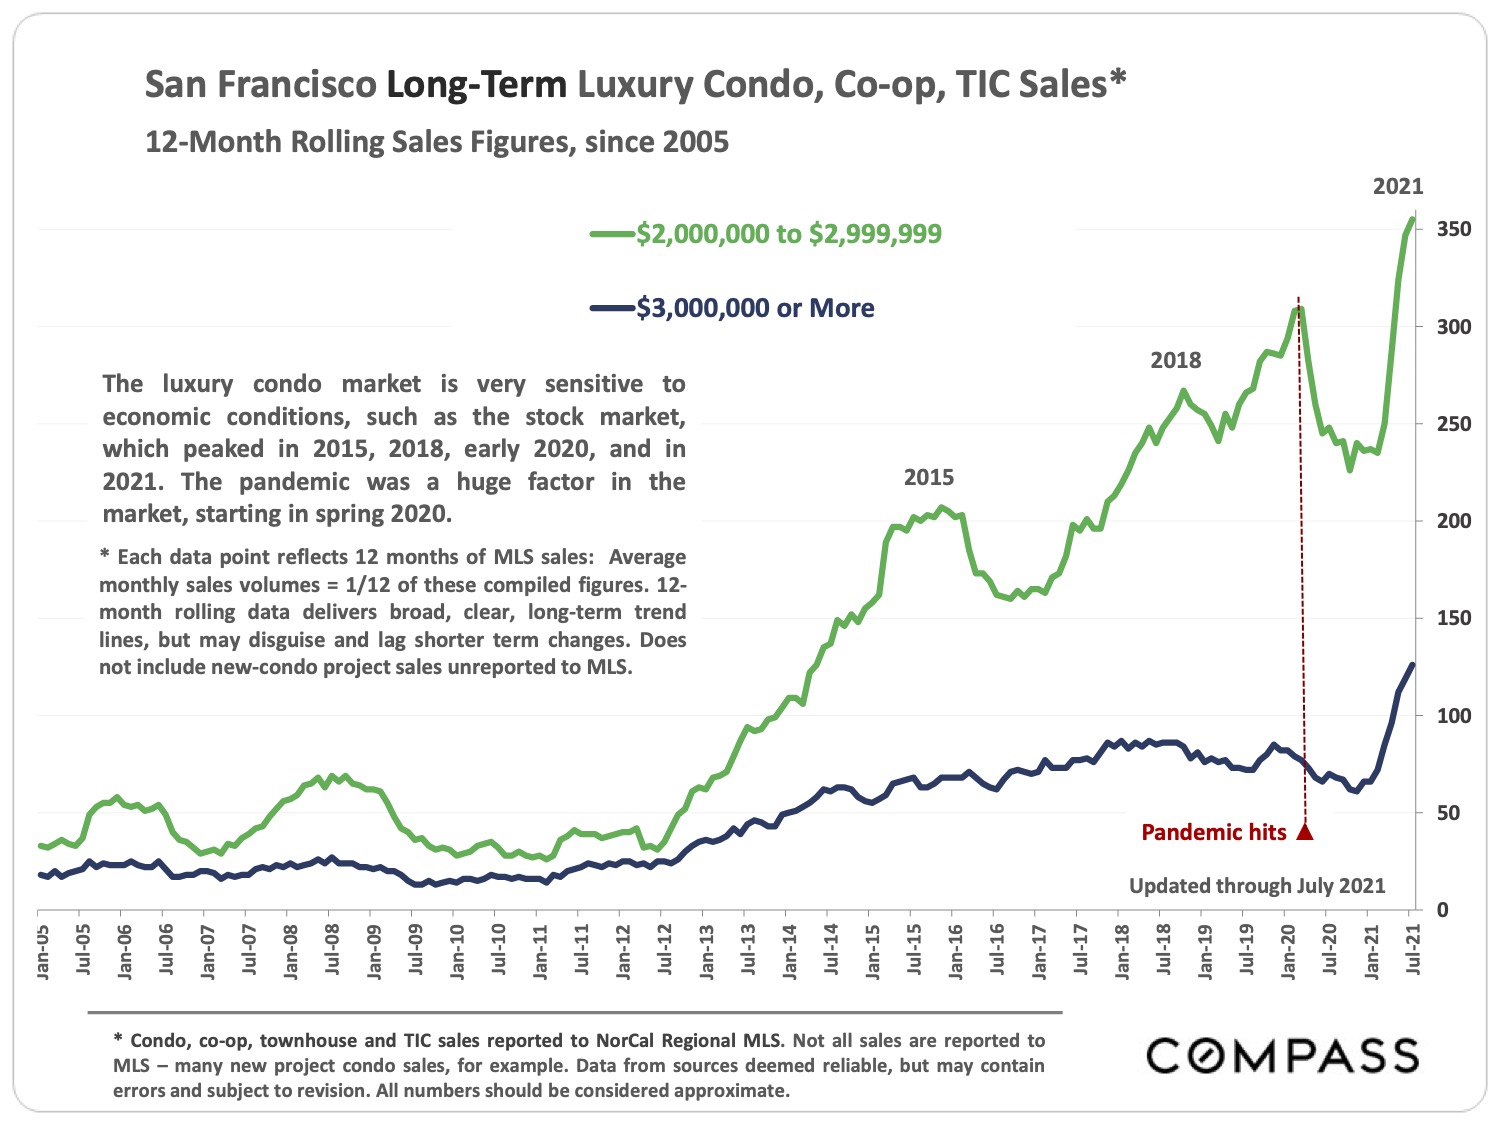 Image of San Francisco Long Term Luxury Condo Coop TIC Sales 12 Month Rolling Sales Figures since 2005